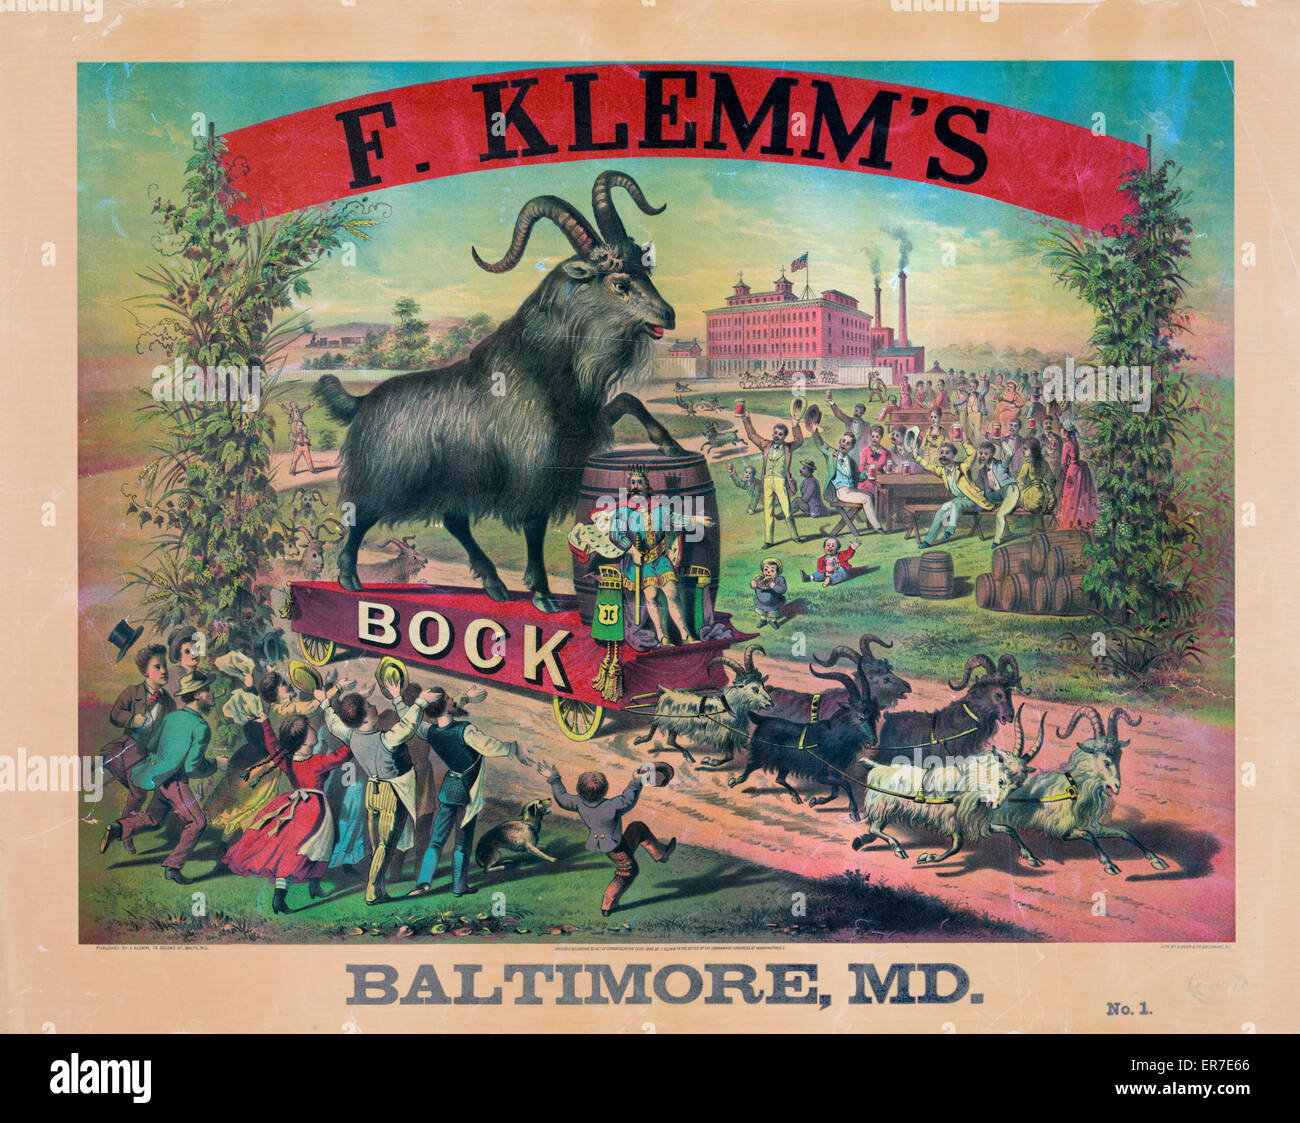 F. Klemm's Bock - Baltimore, Md. No. 1. Date c1880. Stock Photo